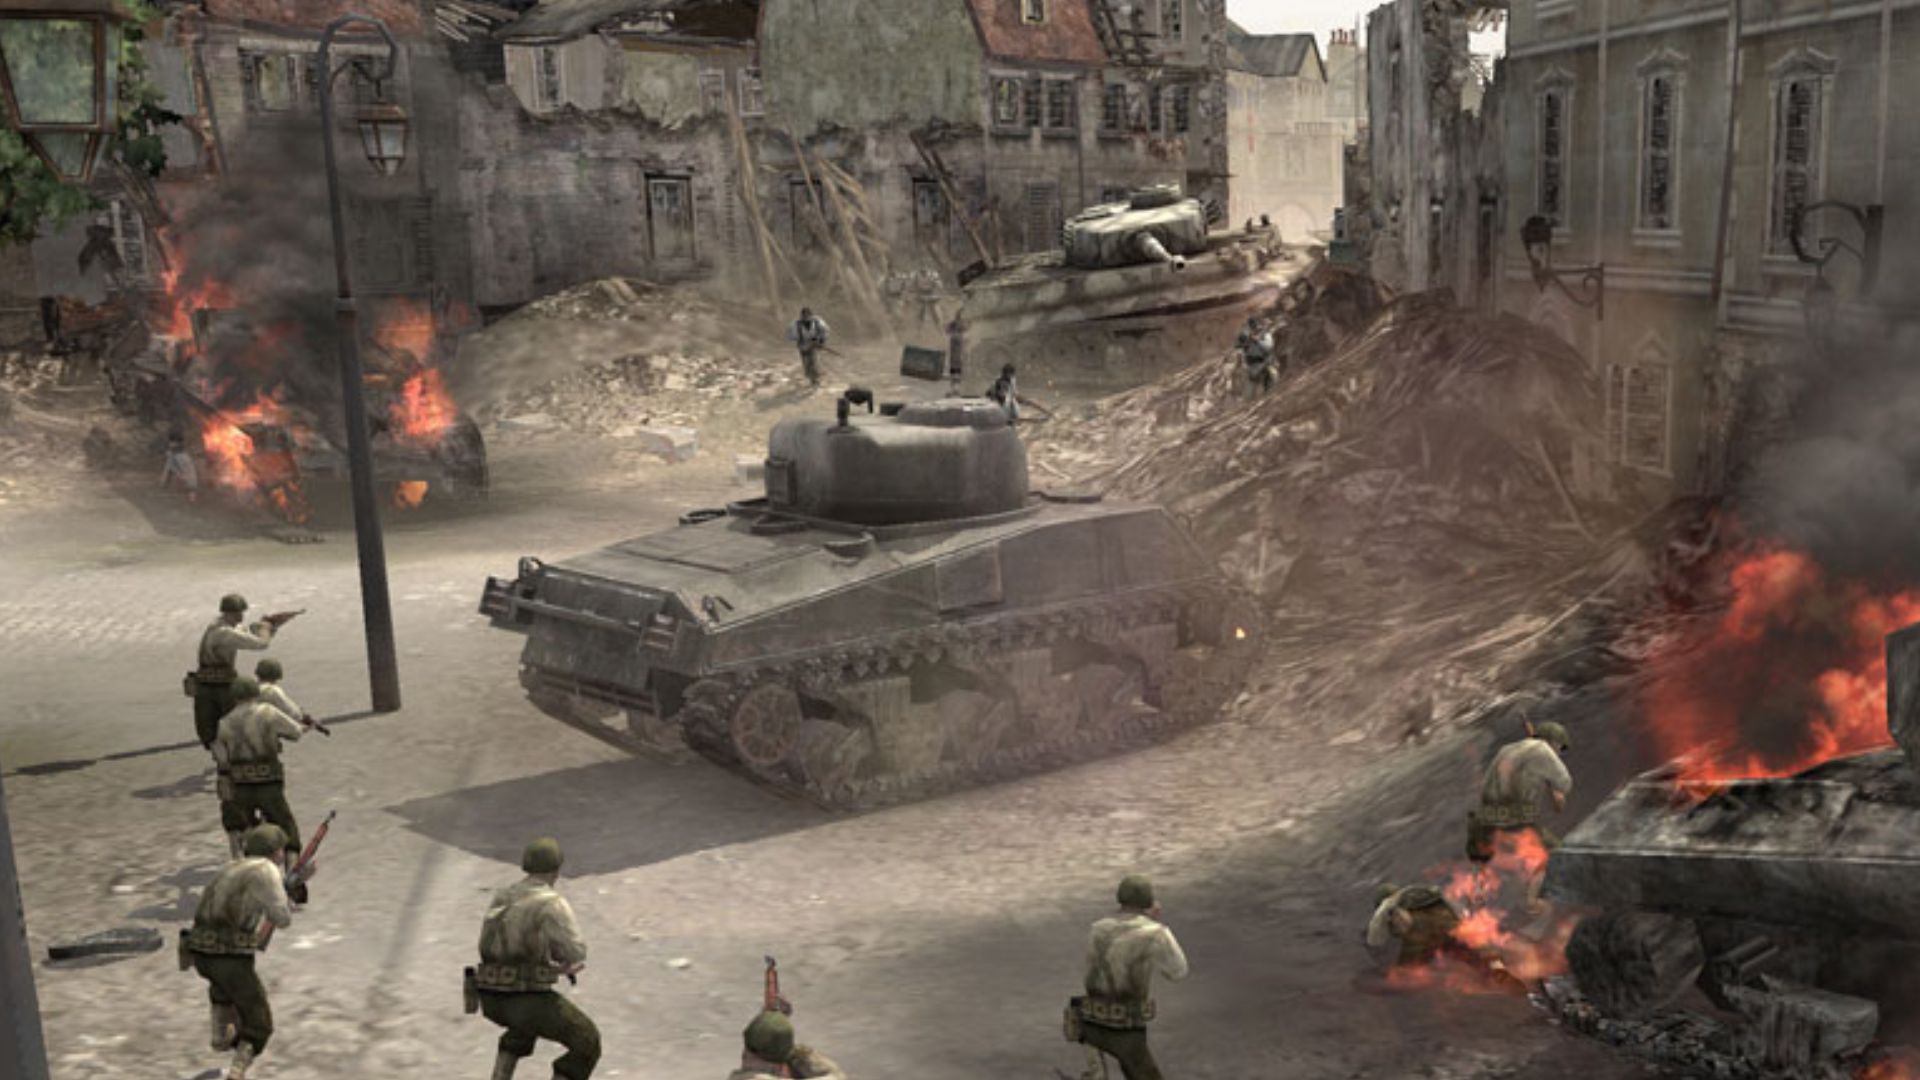 Best history games: Company of Heroes. Image shows a group of soldiers approaching a tank.